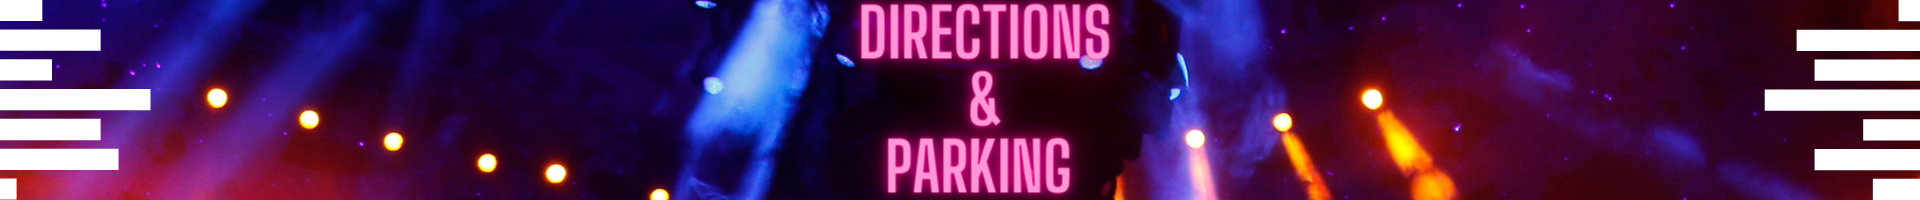 Directions and Parking